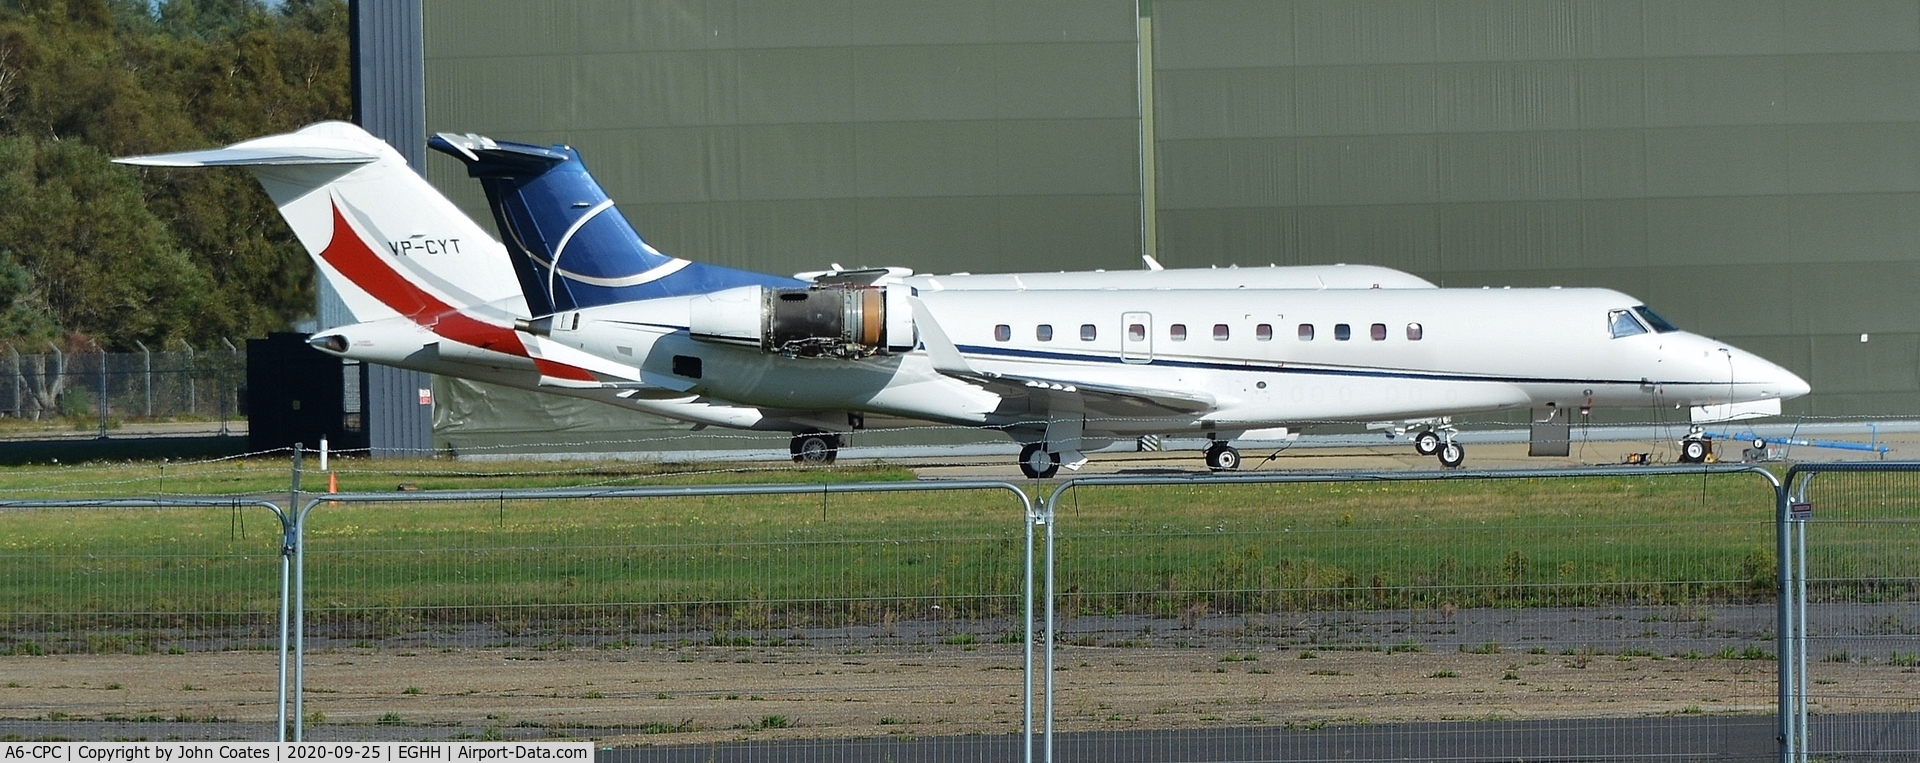 A6-CPC, 2006 Embraer EMB-135BJ Legacy 600 C/N 14500960, At Gama Avn. with VP-CYT